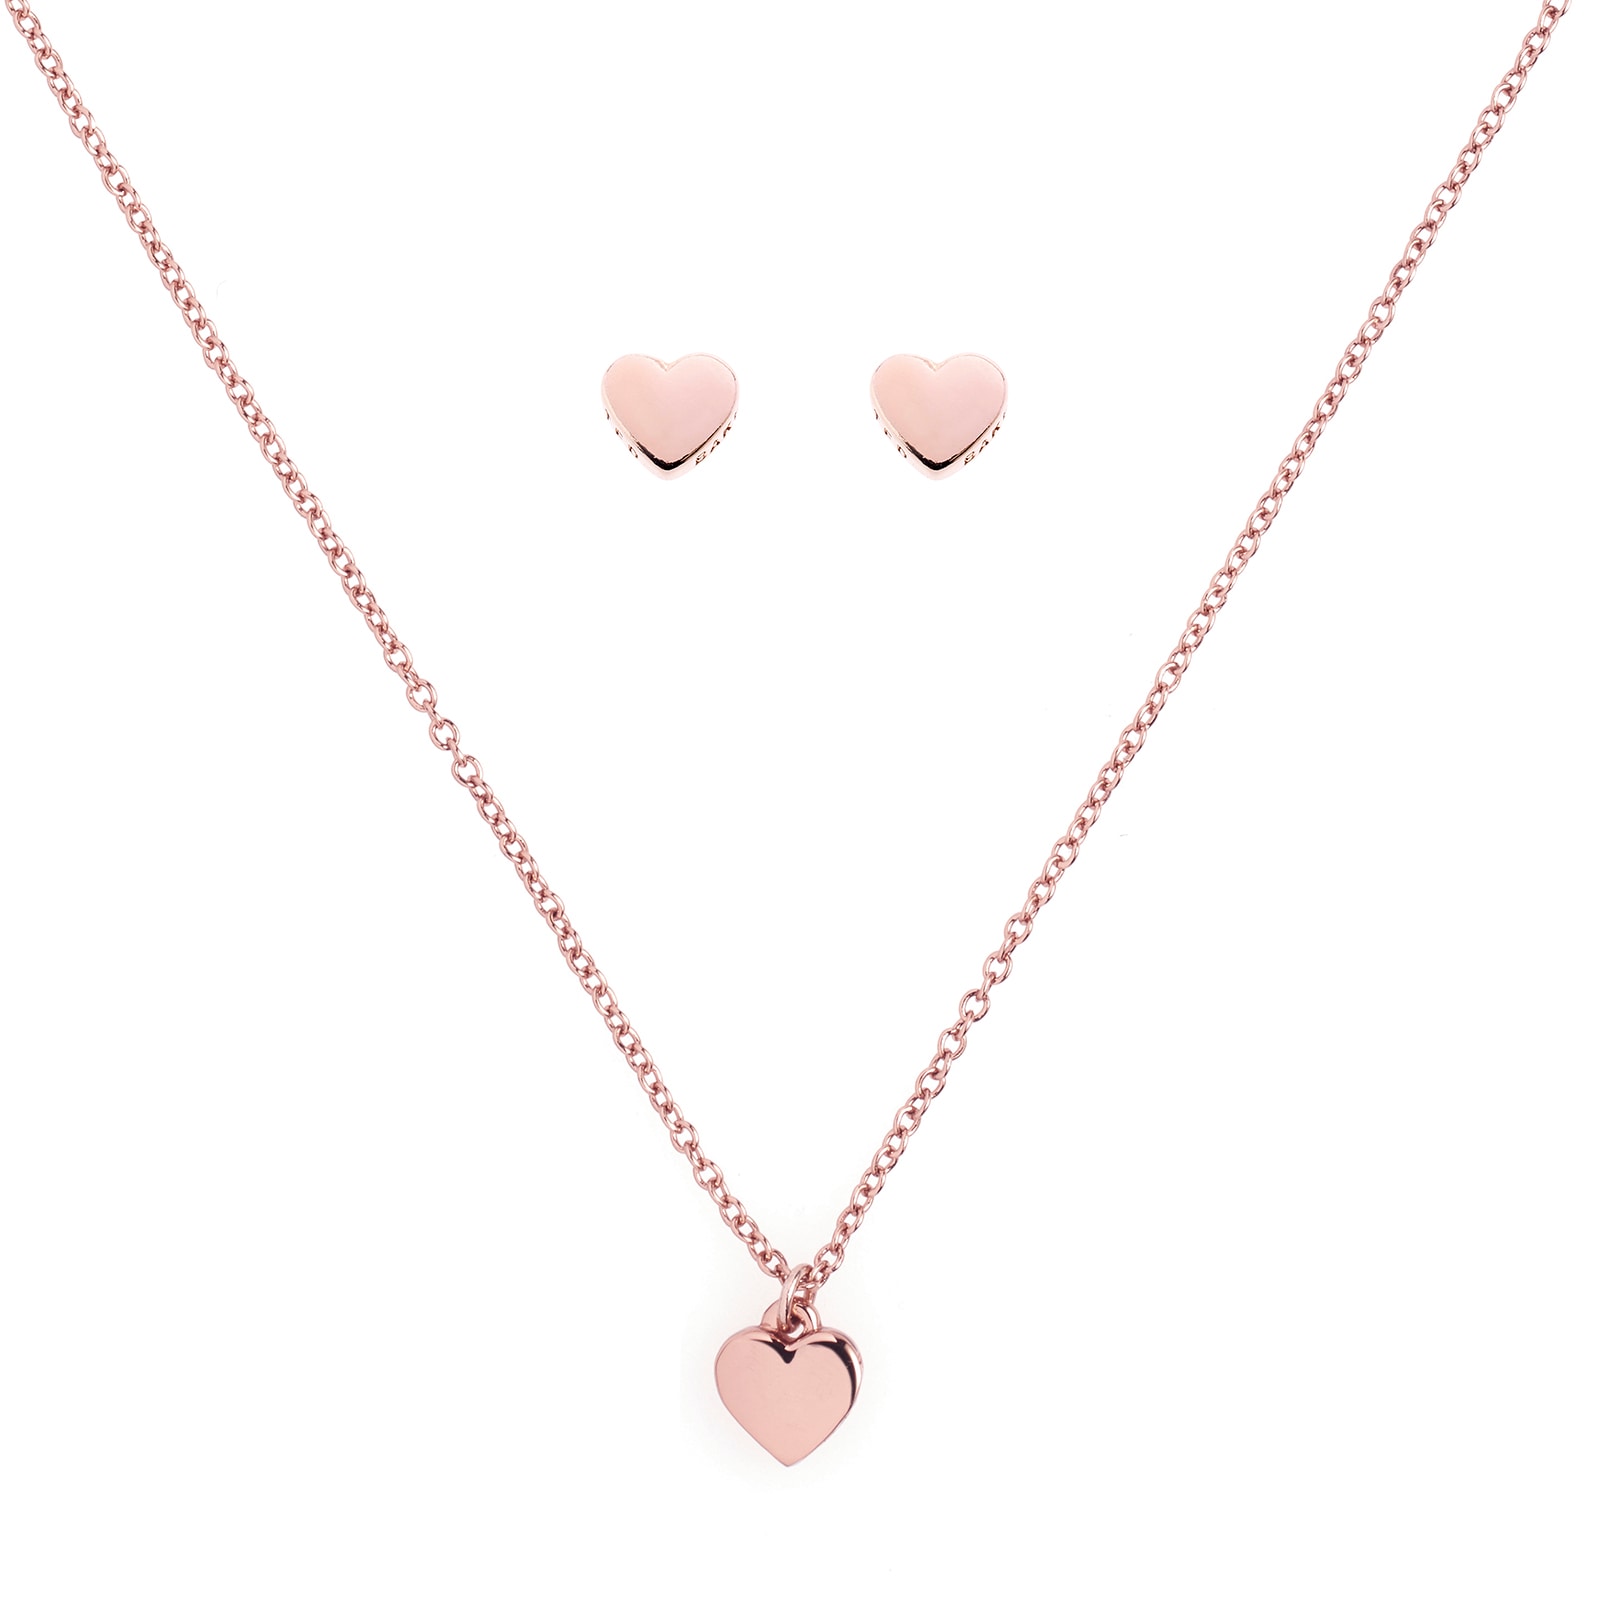 Ted Baker rose gold tiny heart earrings & necklace gift set